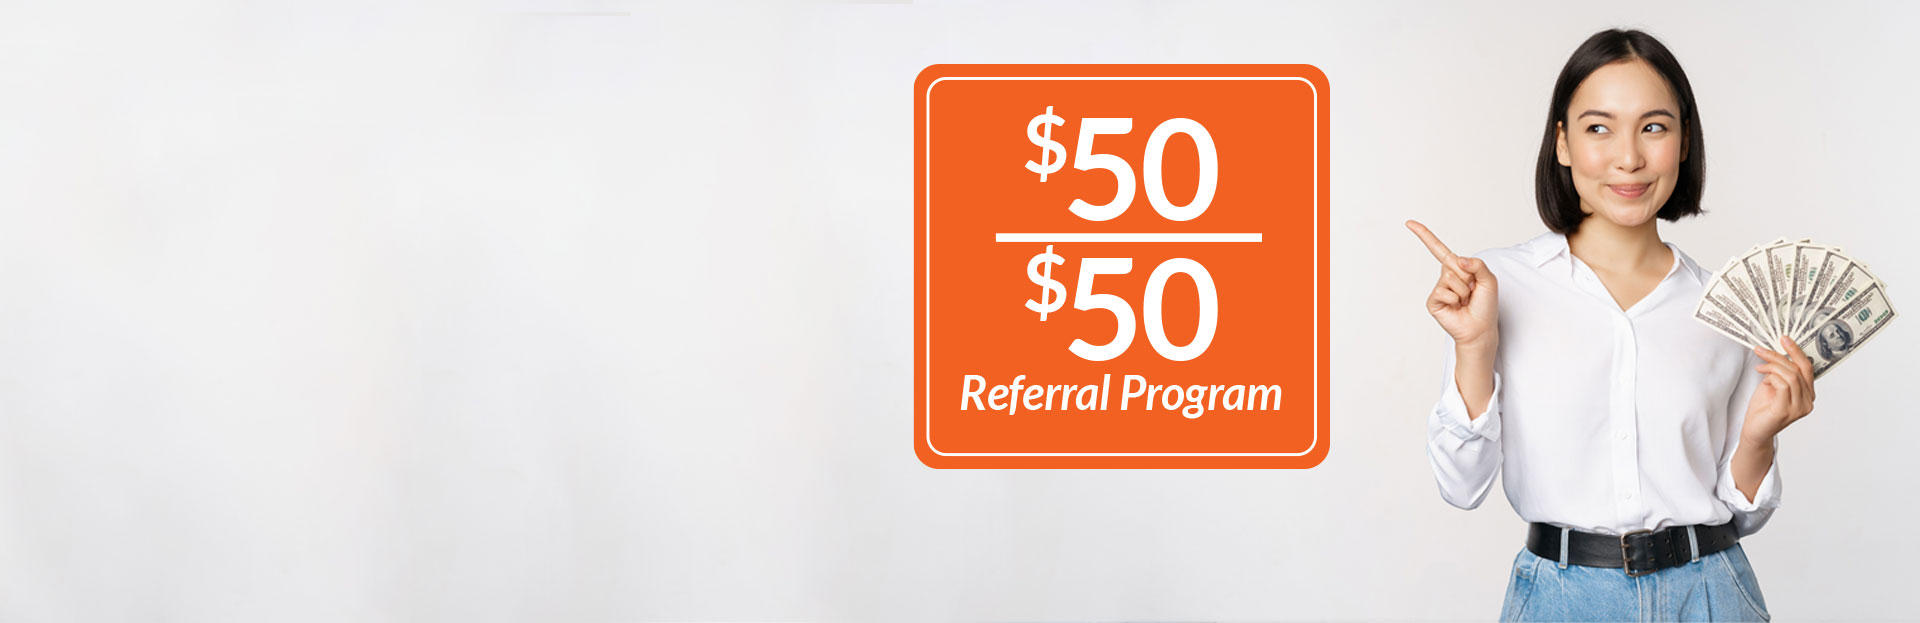 Earn some Green with our Referral Program